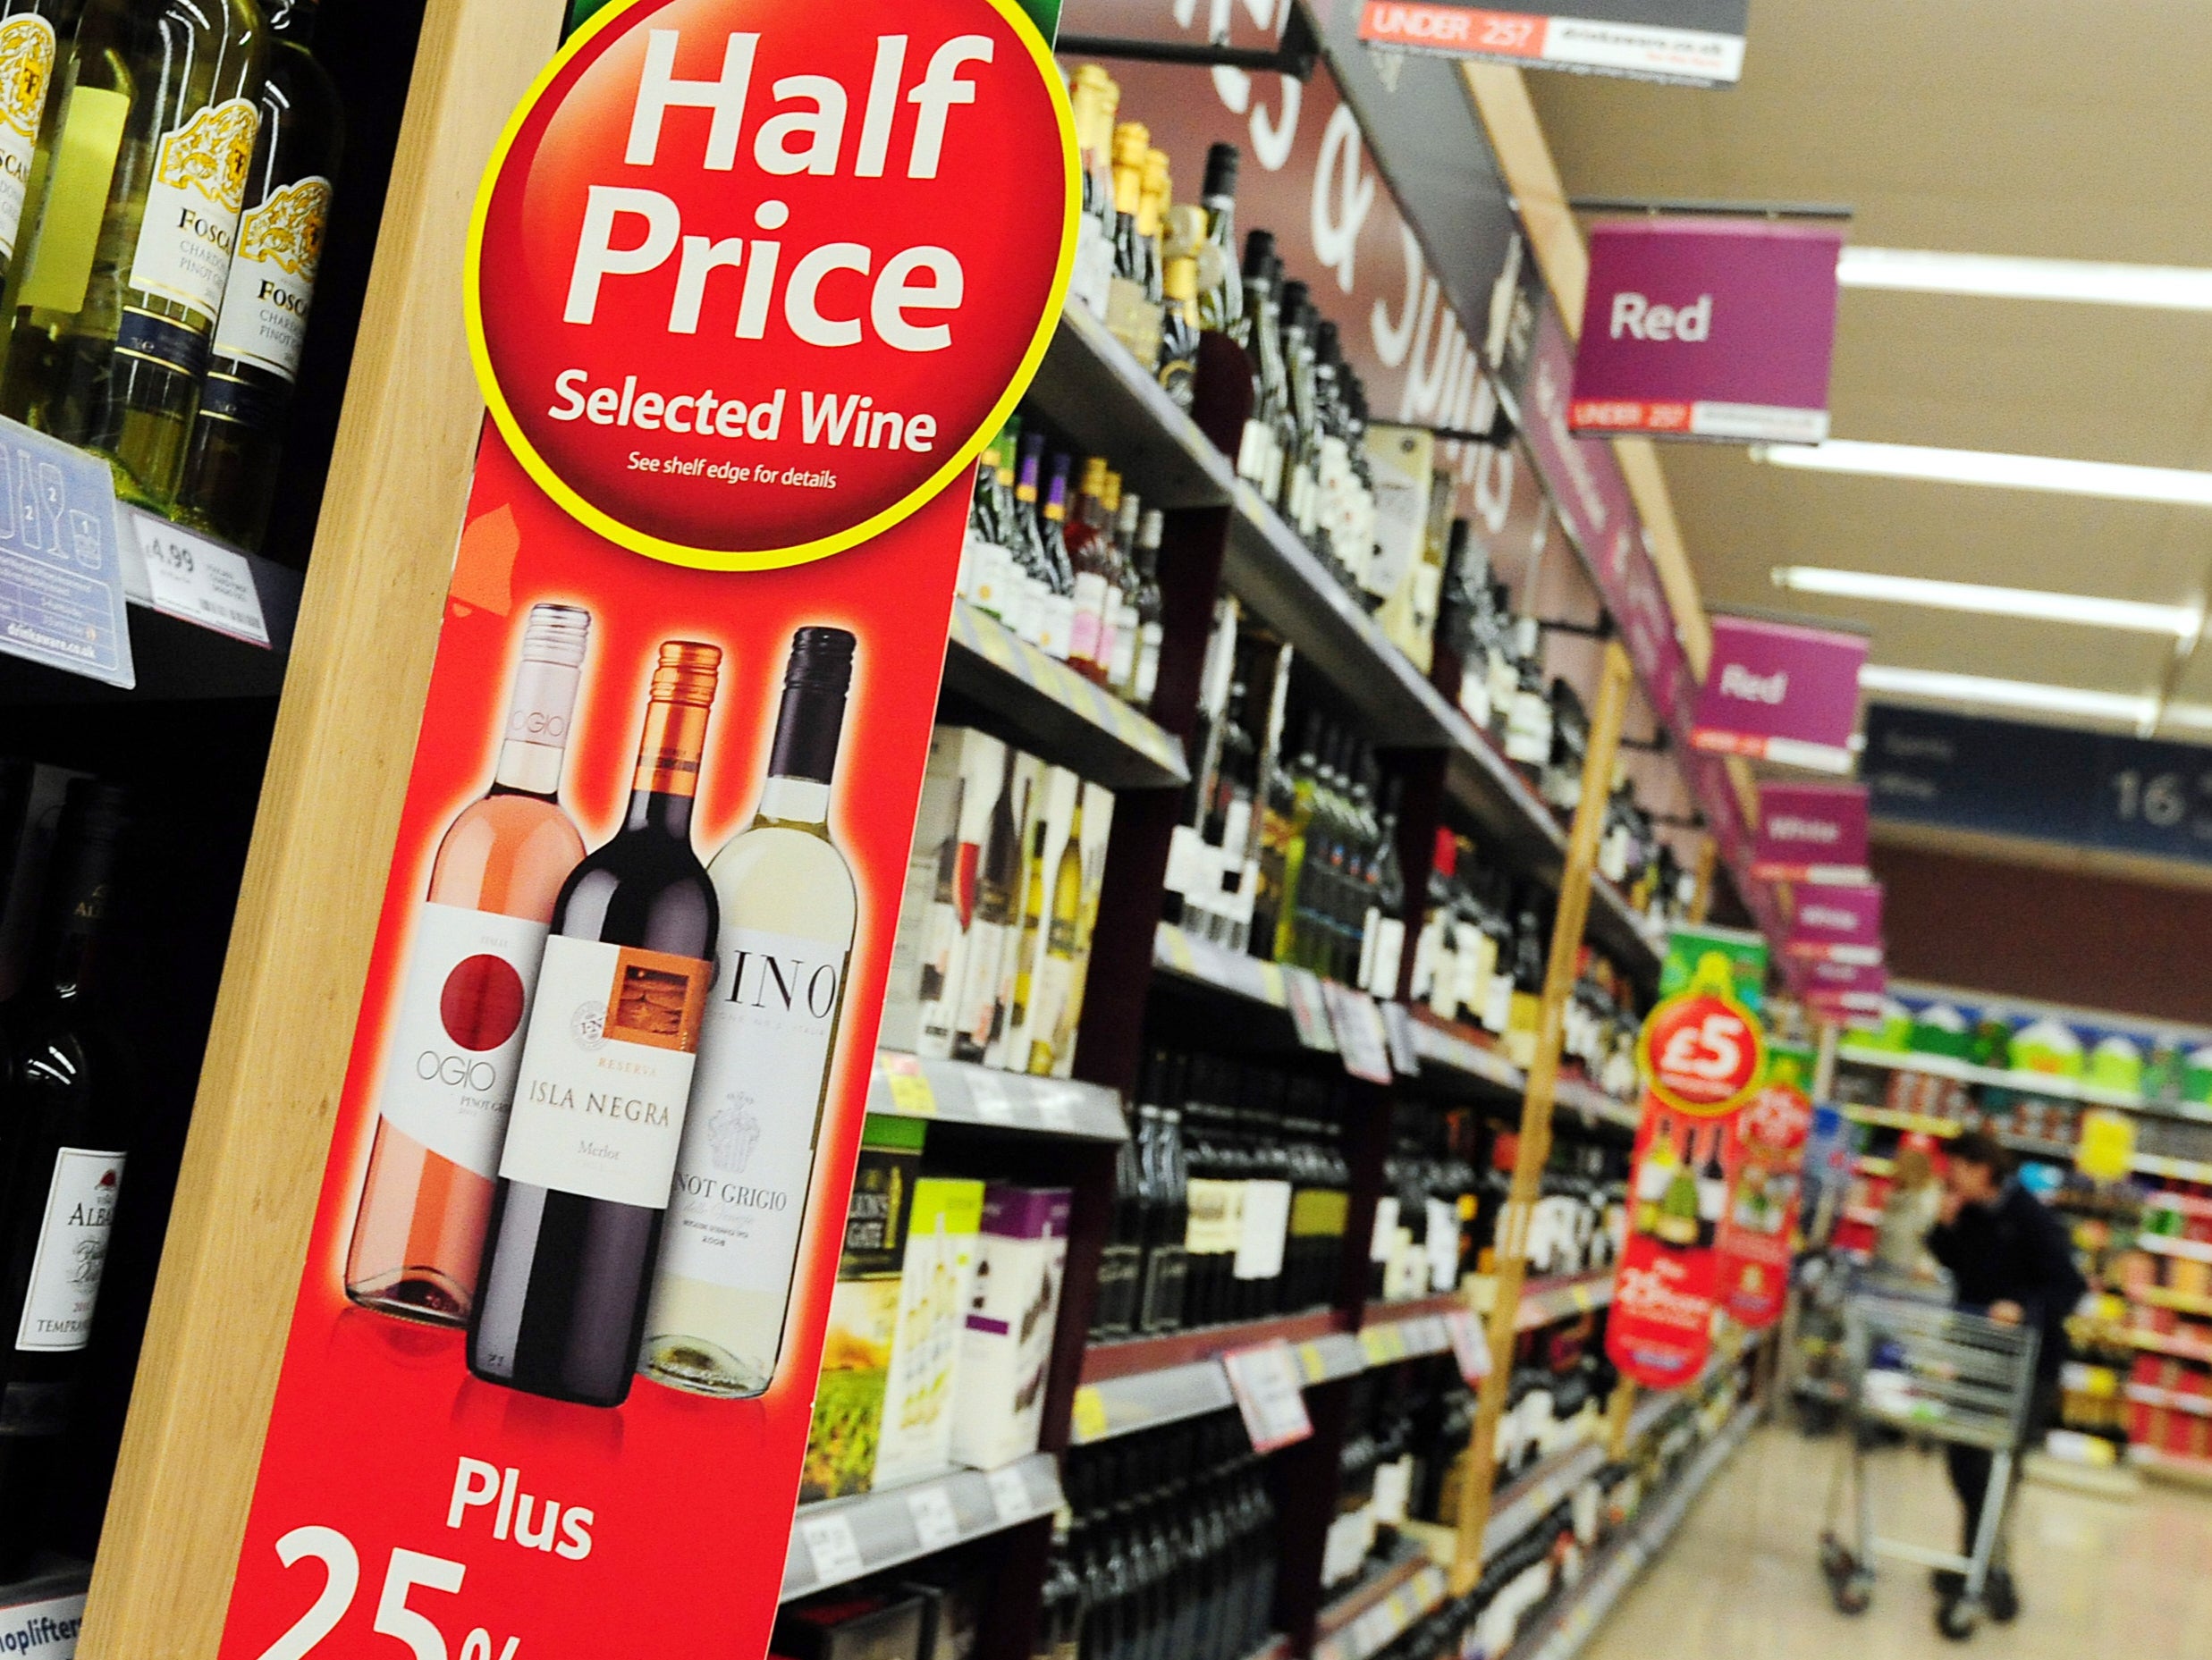 The Wine and Spirit Trade Association said it had received ‘multiple reports’ from its members that importing products is now taking up to five times longer than normal